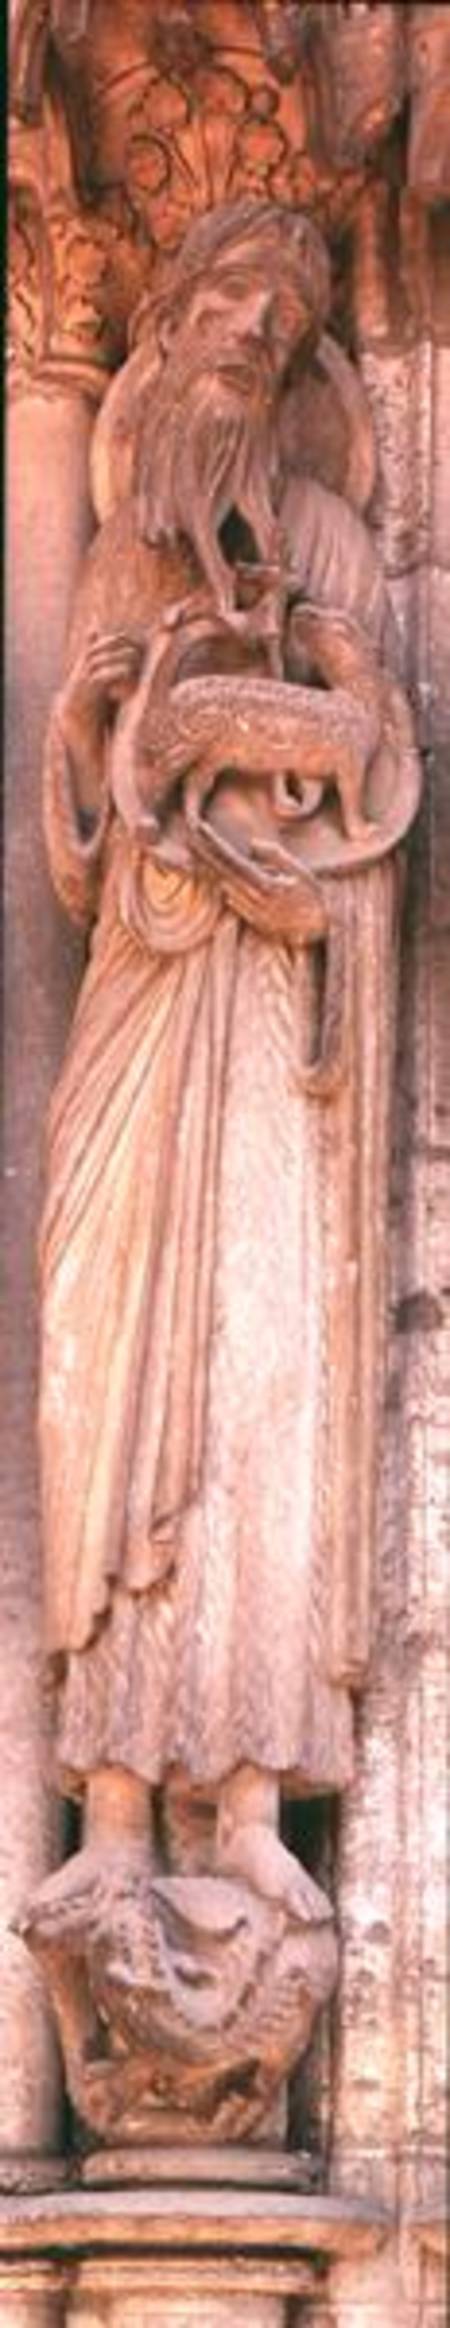 St. John the Baptist, jamb figure from the right hand side of the central door of the north portal de French School